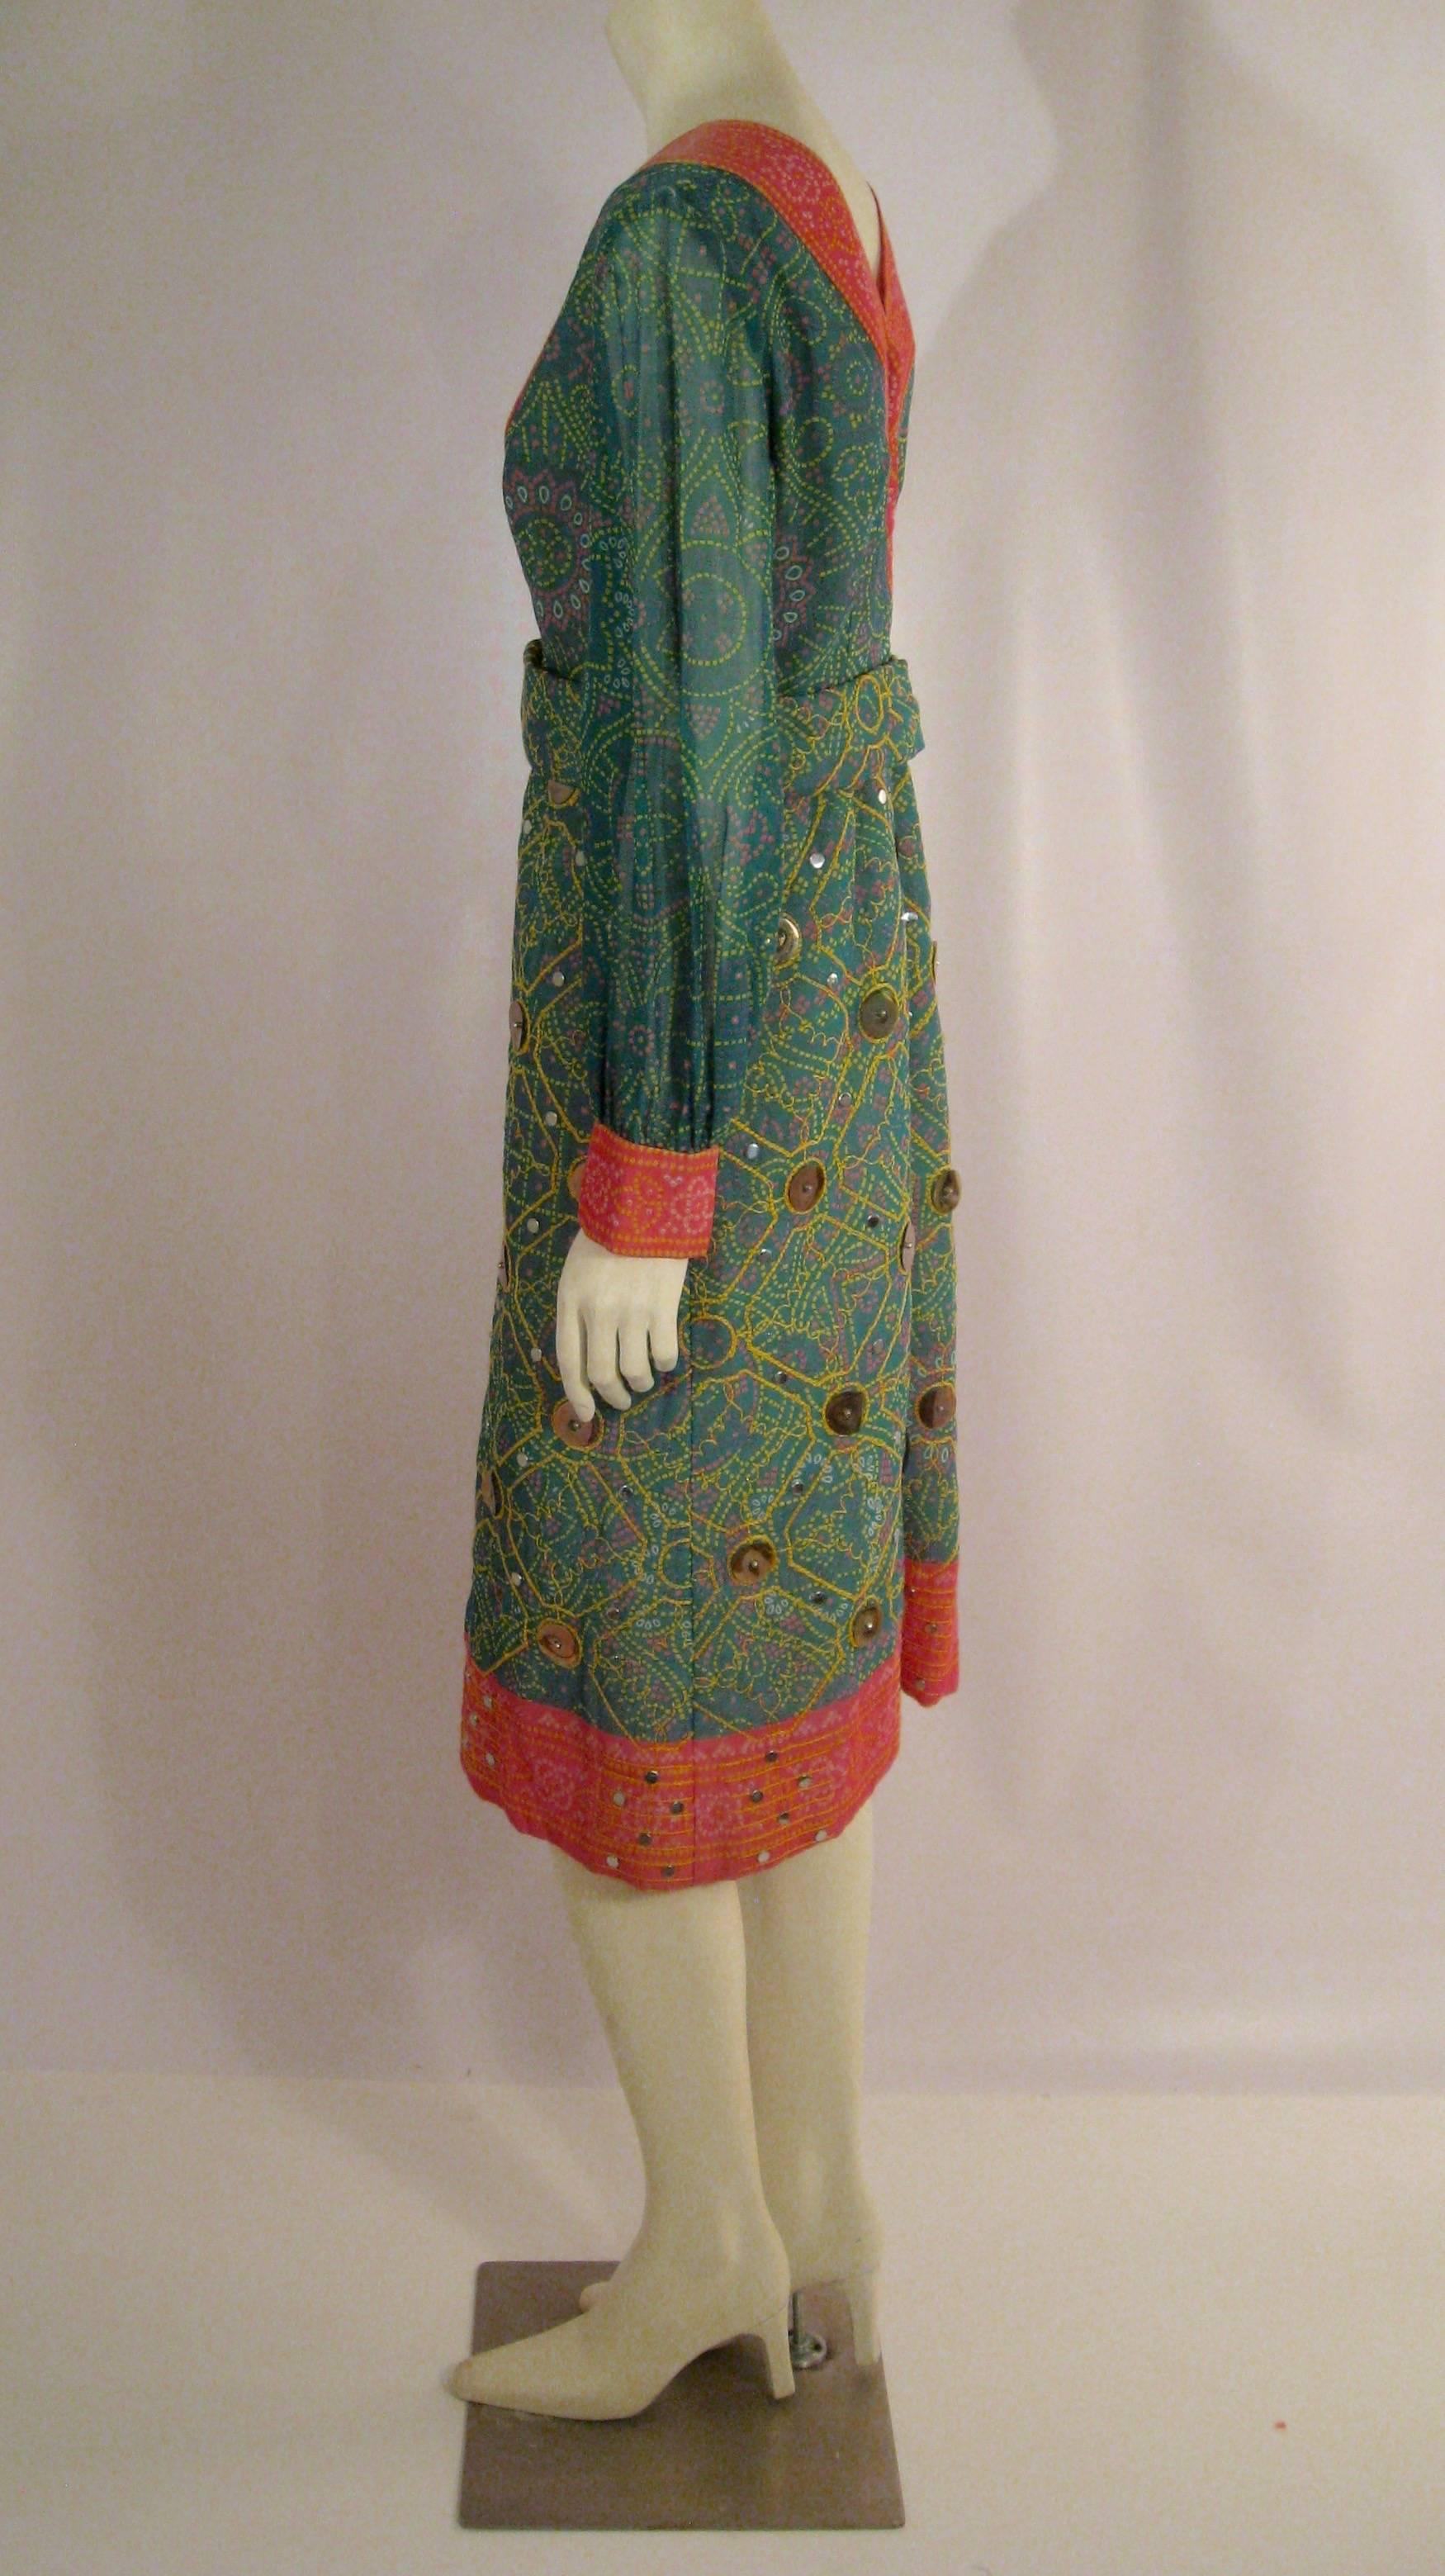 Oscar de la Renta Attributed 1970s Ethnic Print Dress with Embroidery Paillettes 2